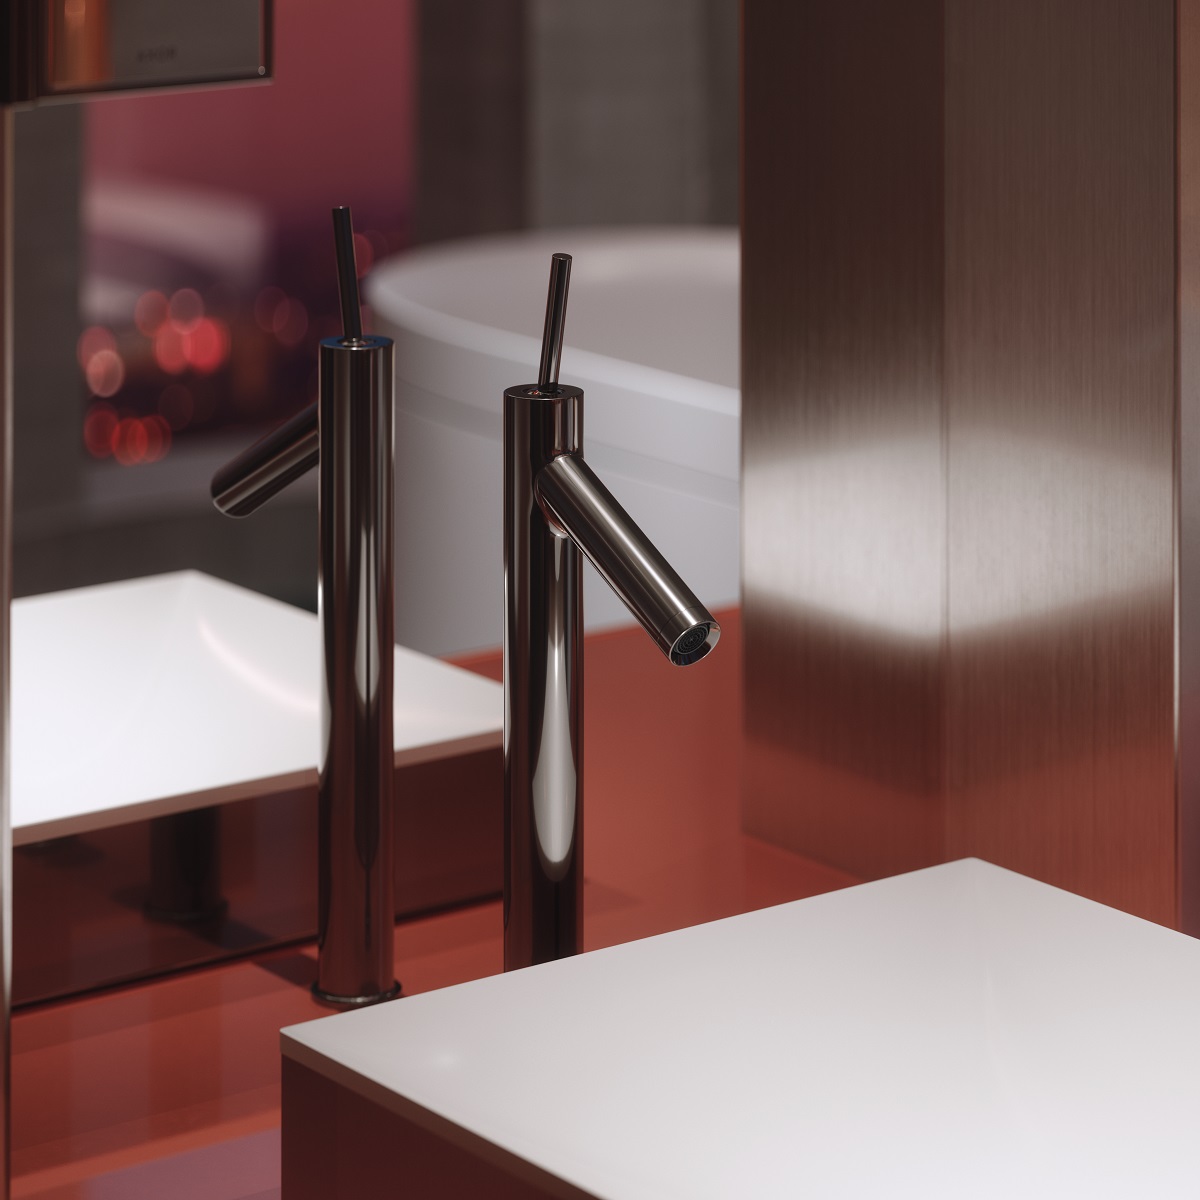 polished black chrome tap above square basin in front of vanity mirror in AXOR bathroom concept